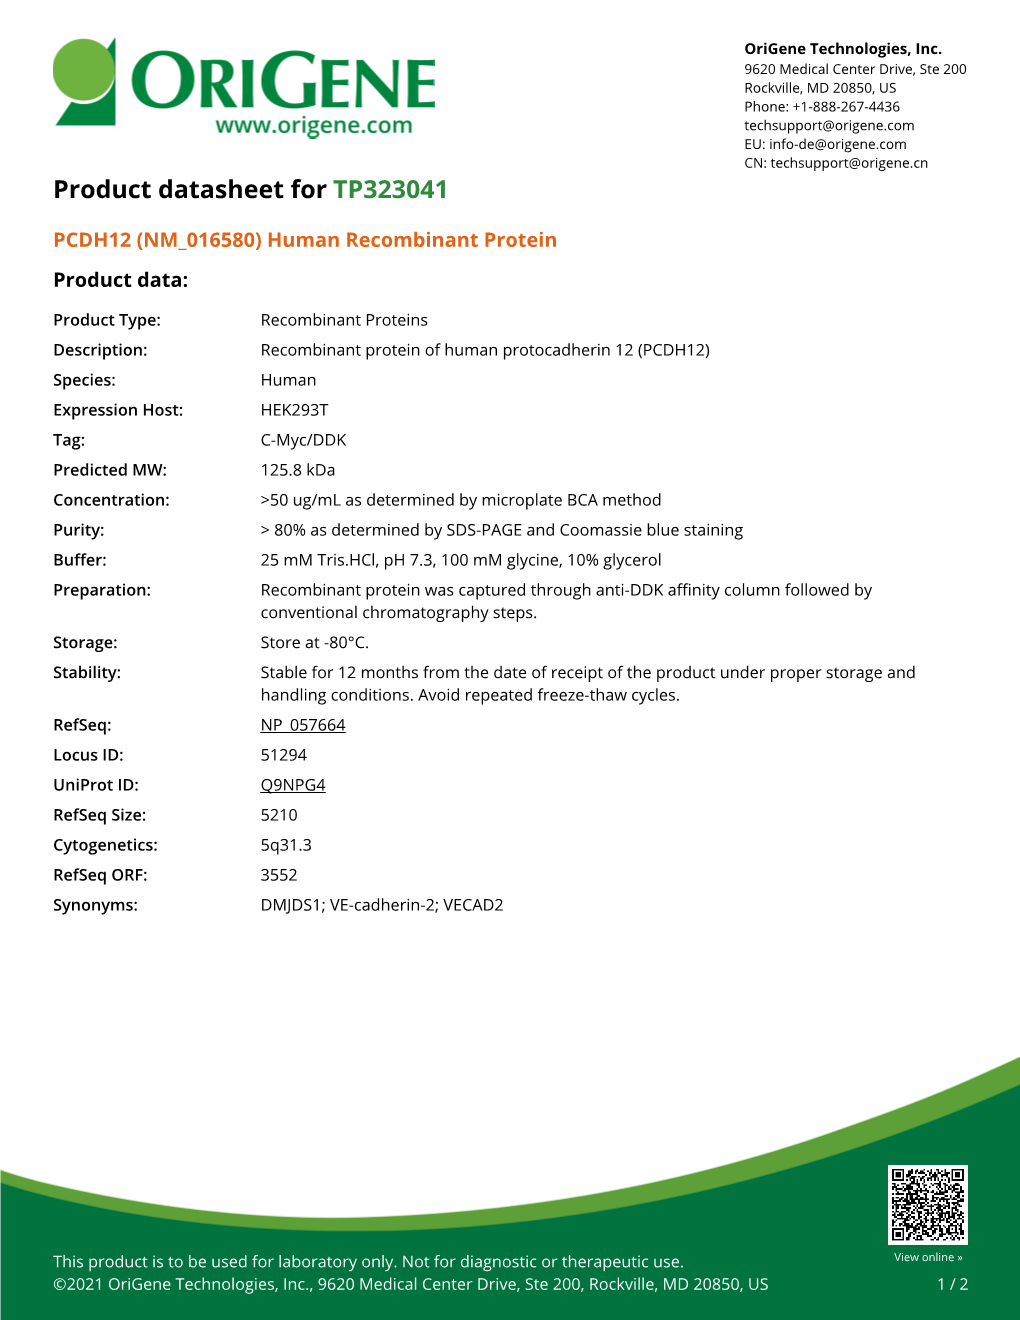 PCDH12 (NM 016580) Human Recombinant Protein Product Data